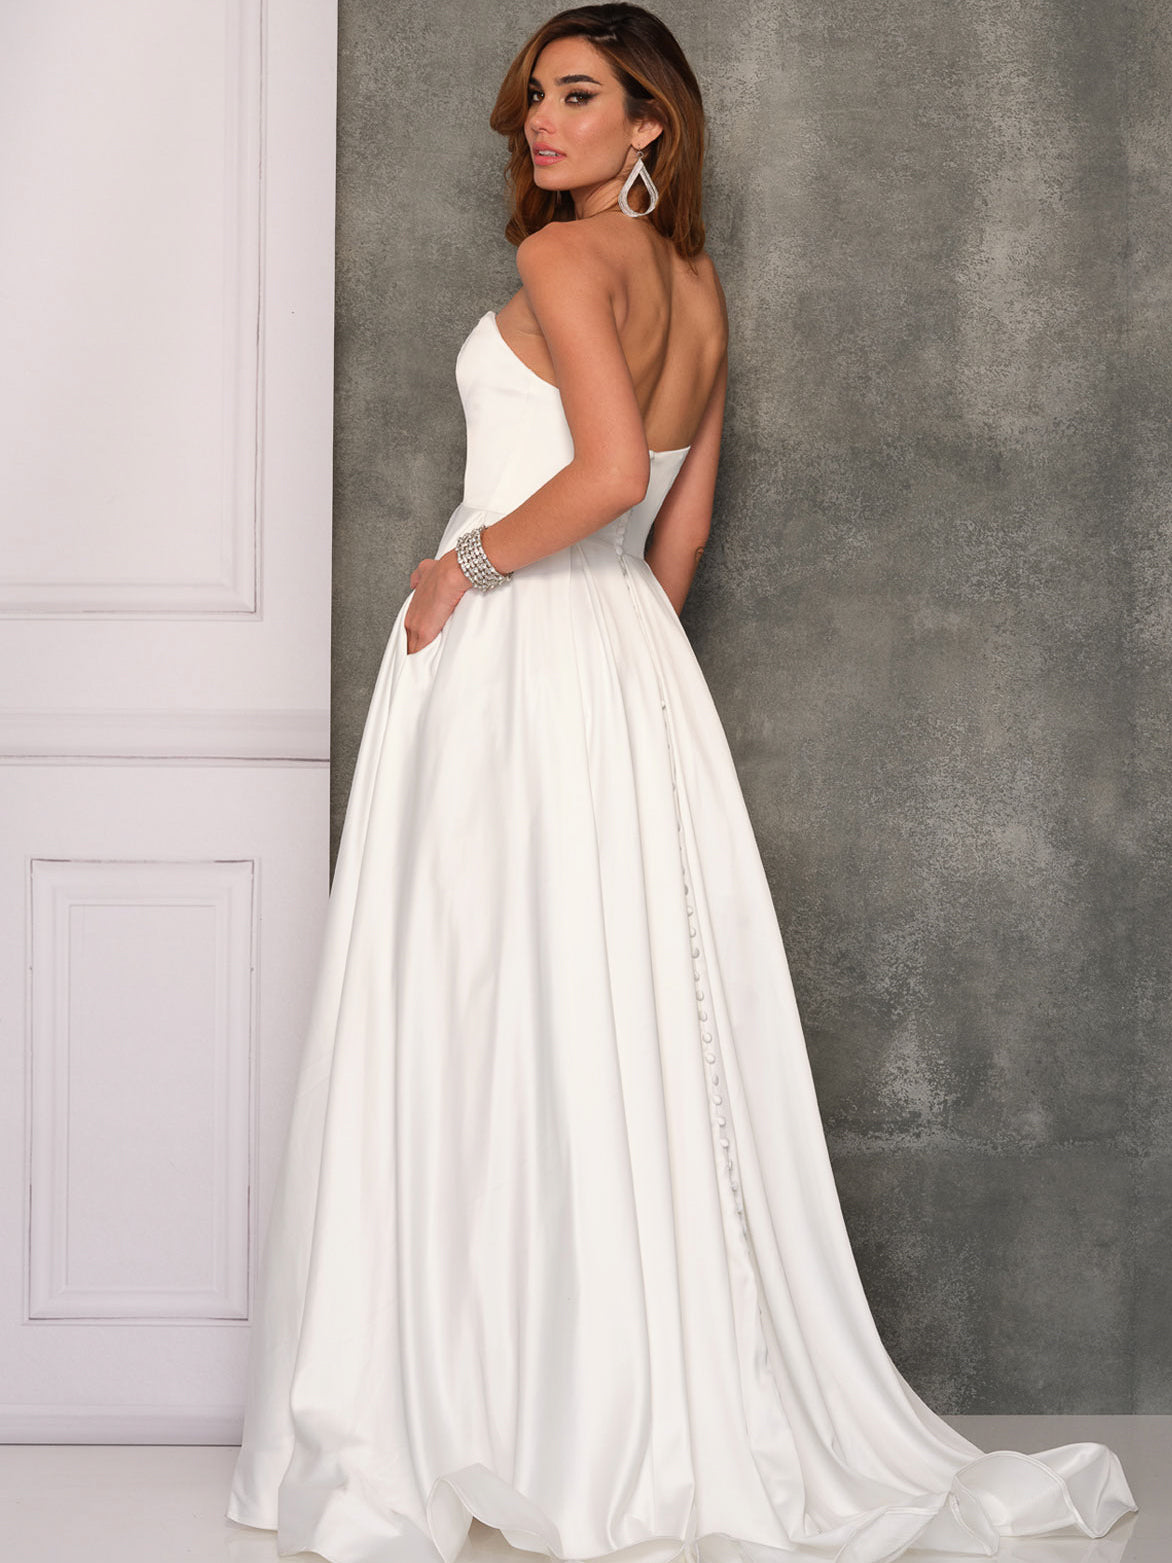 BUTTON SWEETHEART STRAPLESS WEDDING GOWN